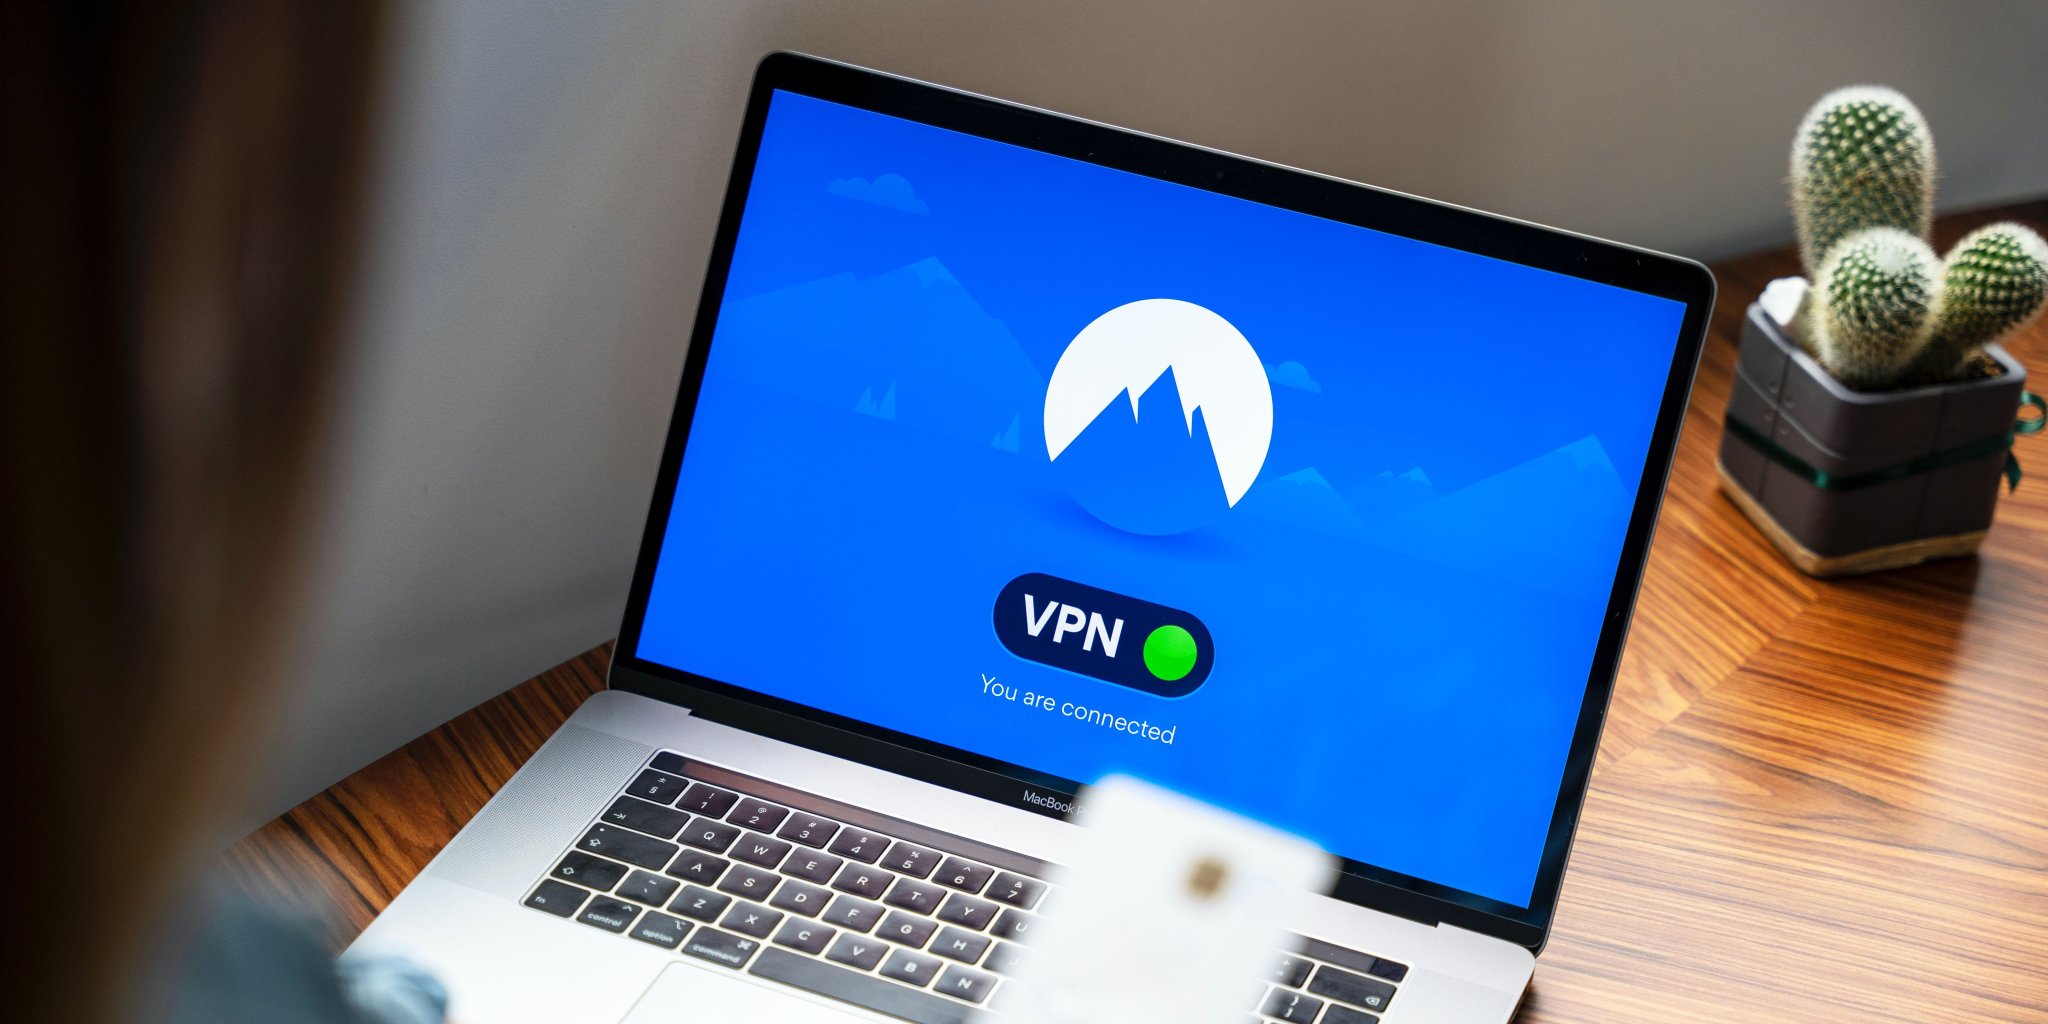 Who Can Track Your Data When Using a VPN?